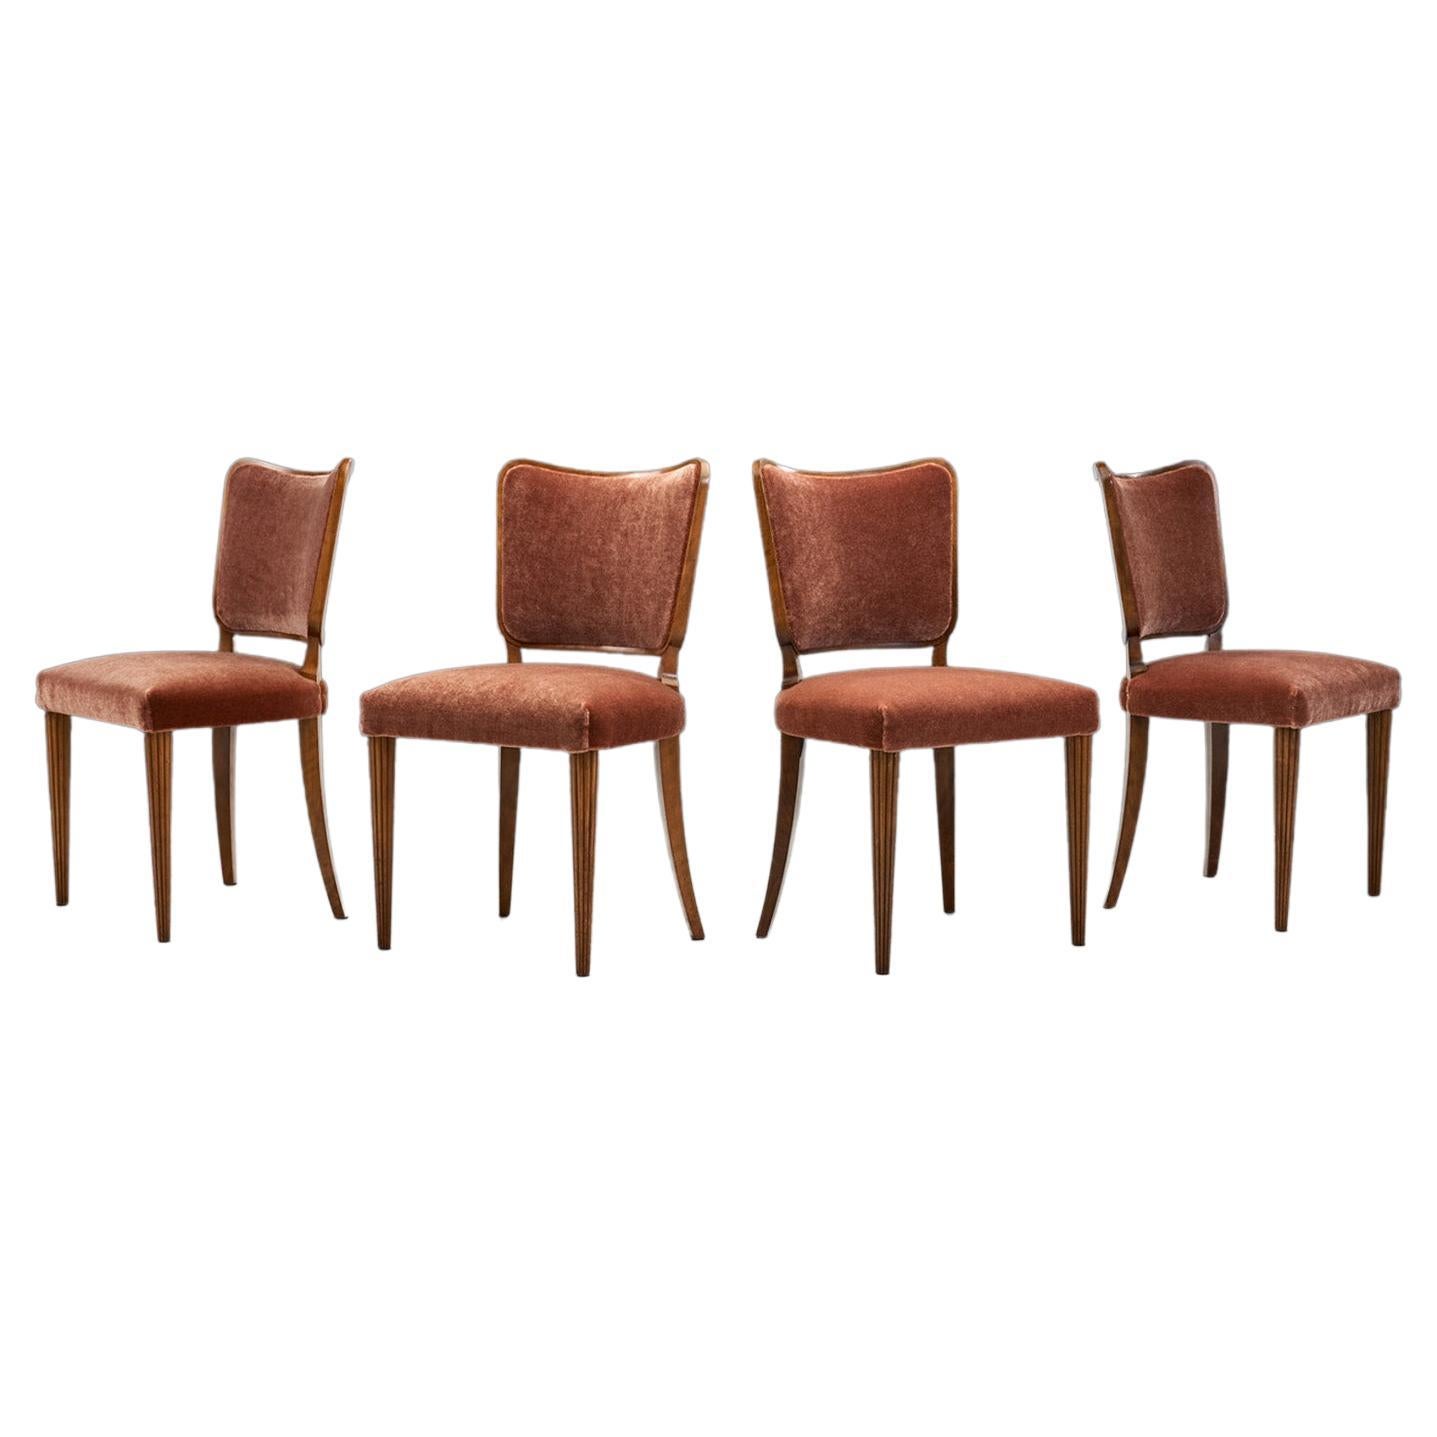 Set of Four Swedish Modern Dining Chairs, Sweden, 1940s